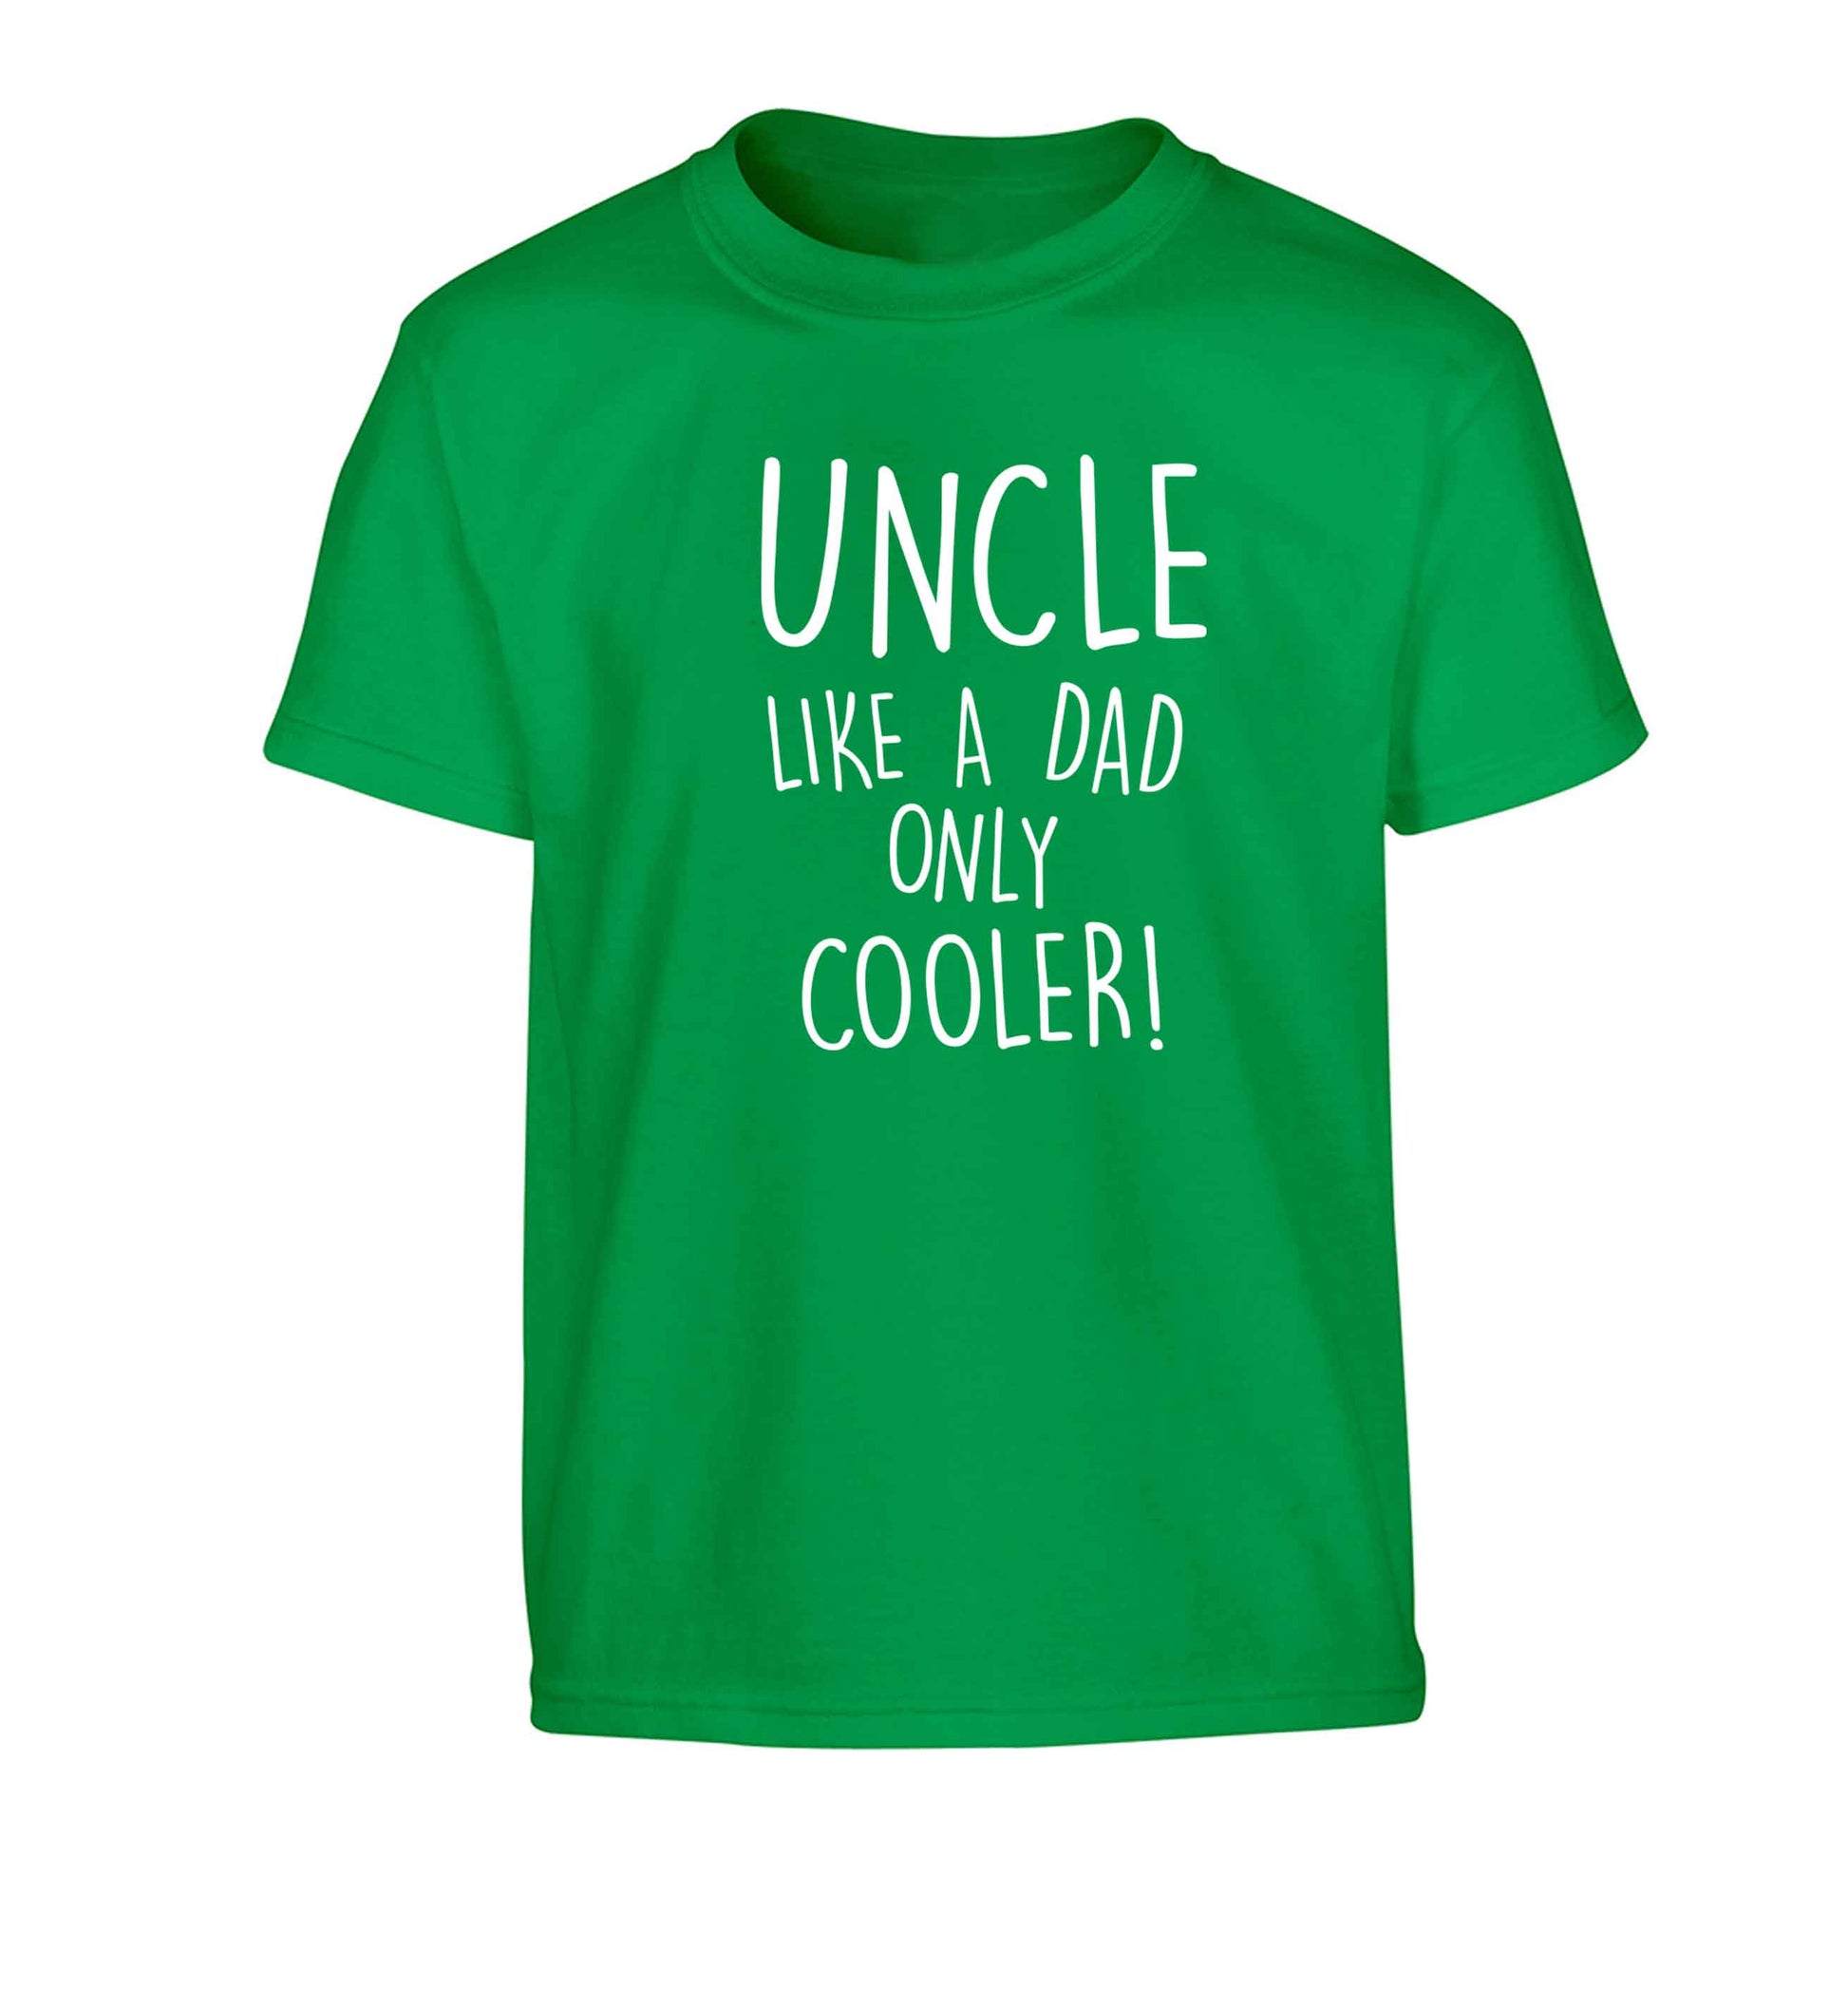 Uncle like a dad only cooler Children's green Tshirt 12-13 Years